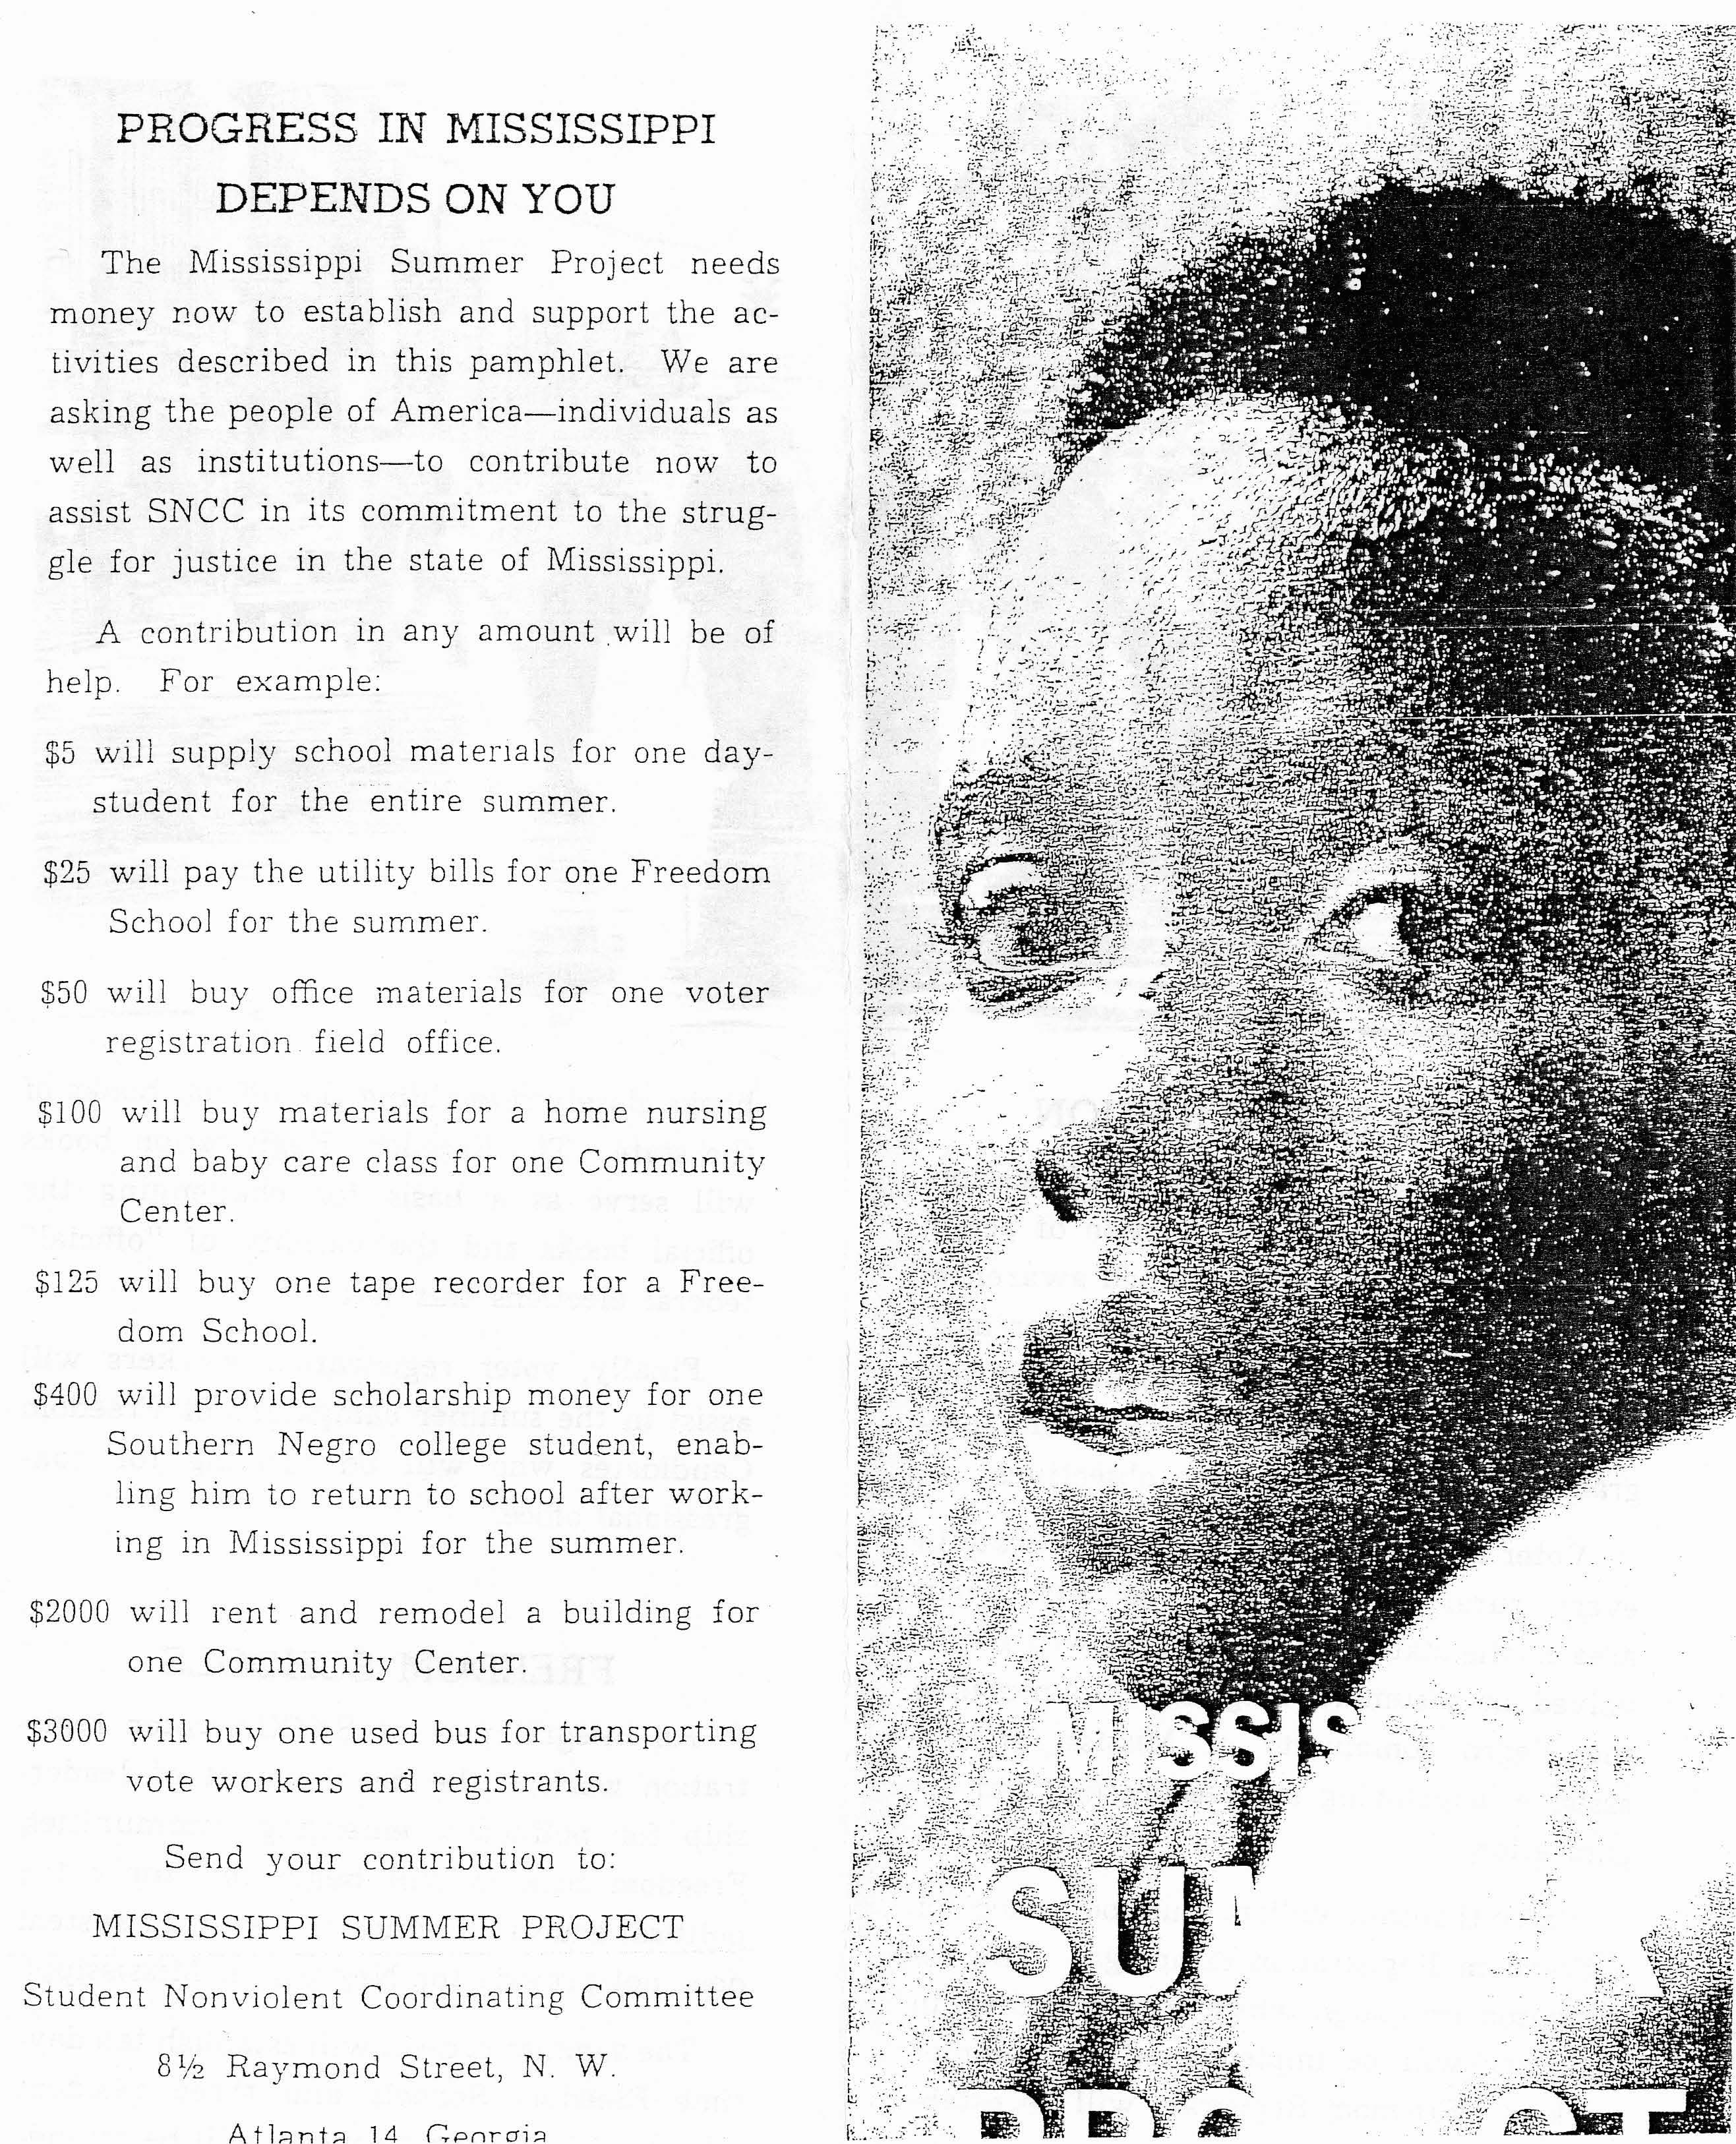 Pamphlet by the Student Nonviolent Coordinating Committee